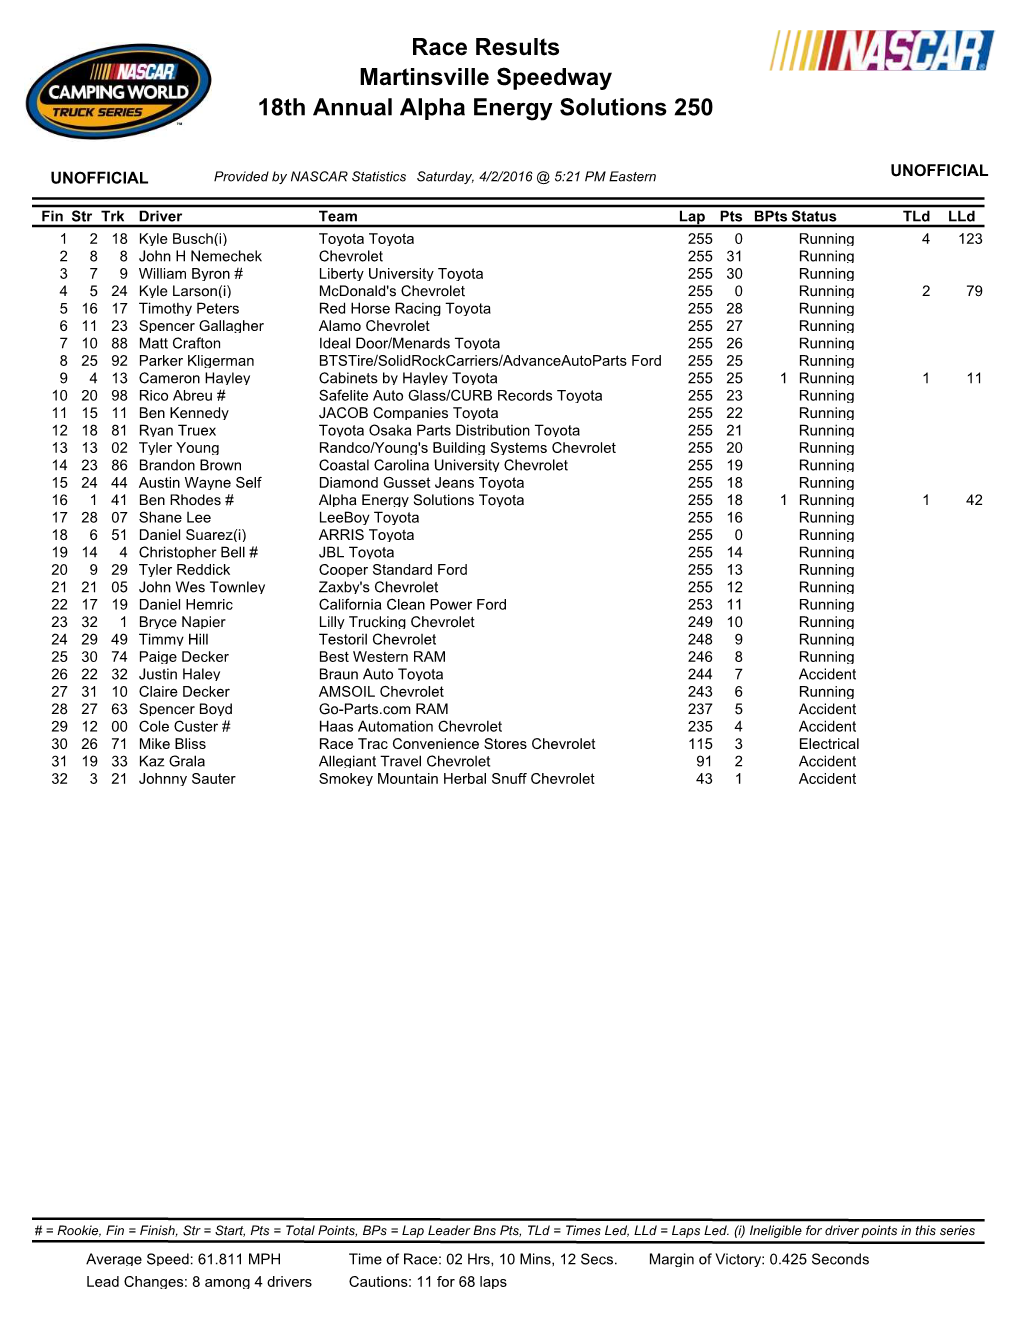 Race Results Martinsville Speedway 18Th Annual Alpha Energy Solutions 250